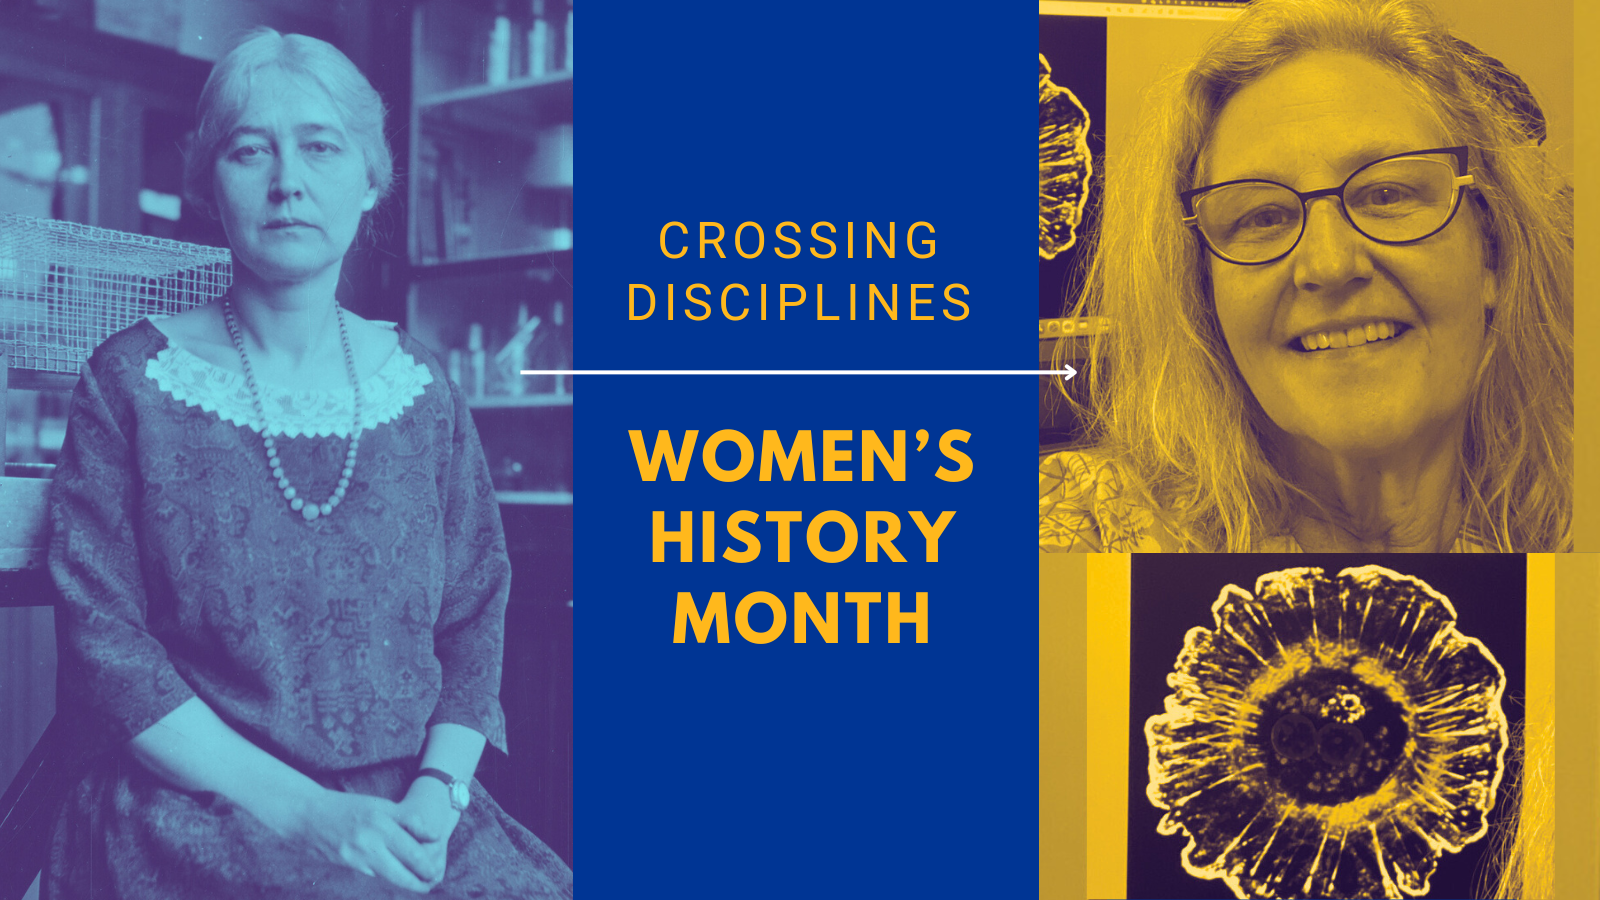 Header with two women that says: Crossing disciplines